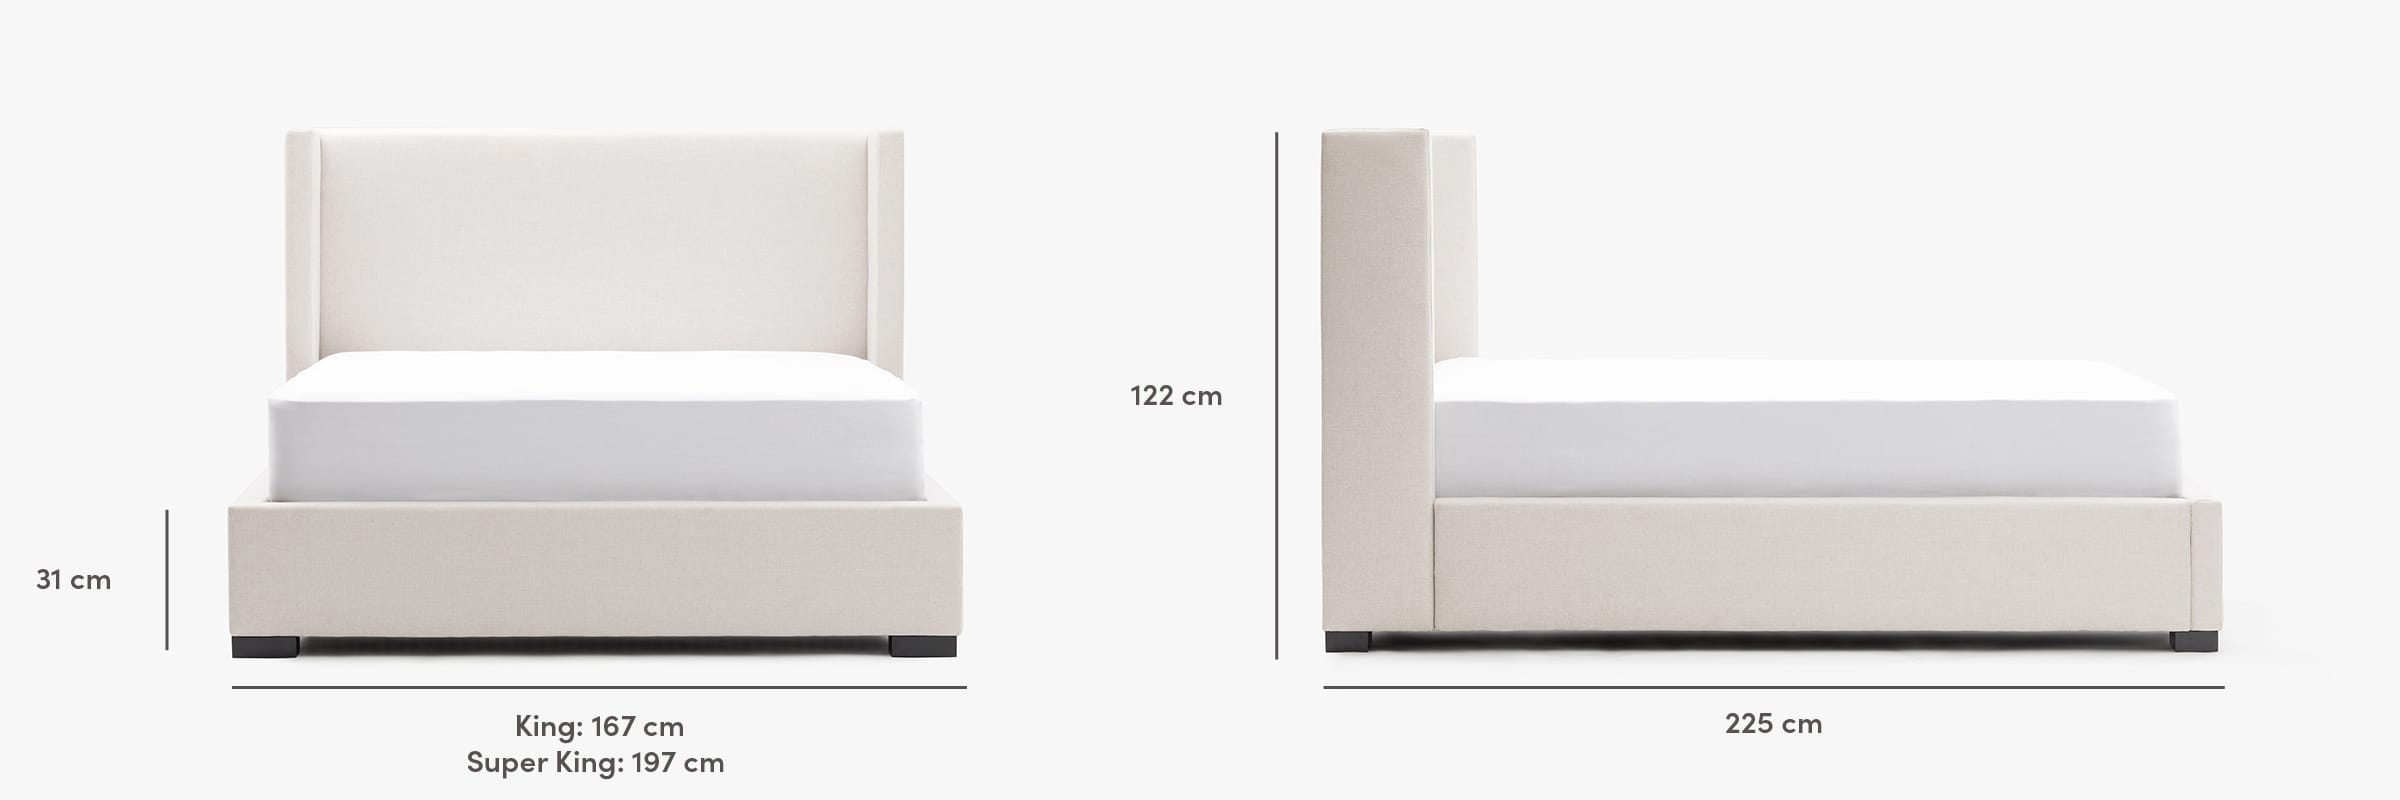 The Osaka bed dimensions